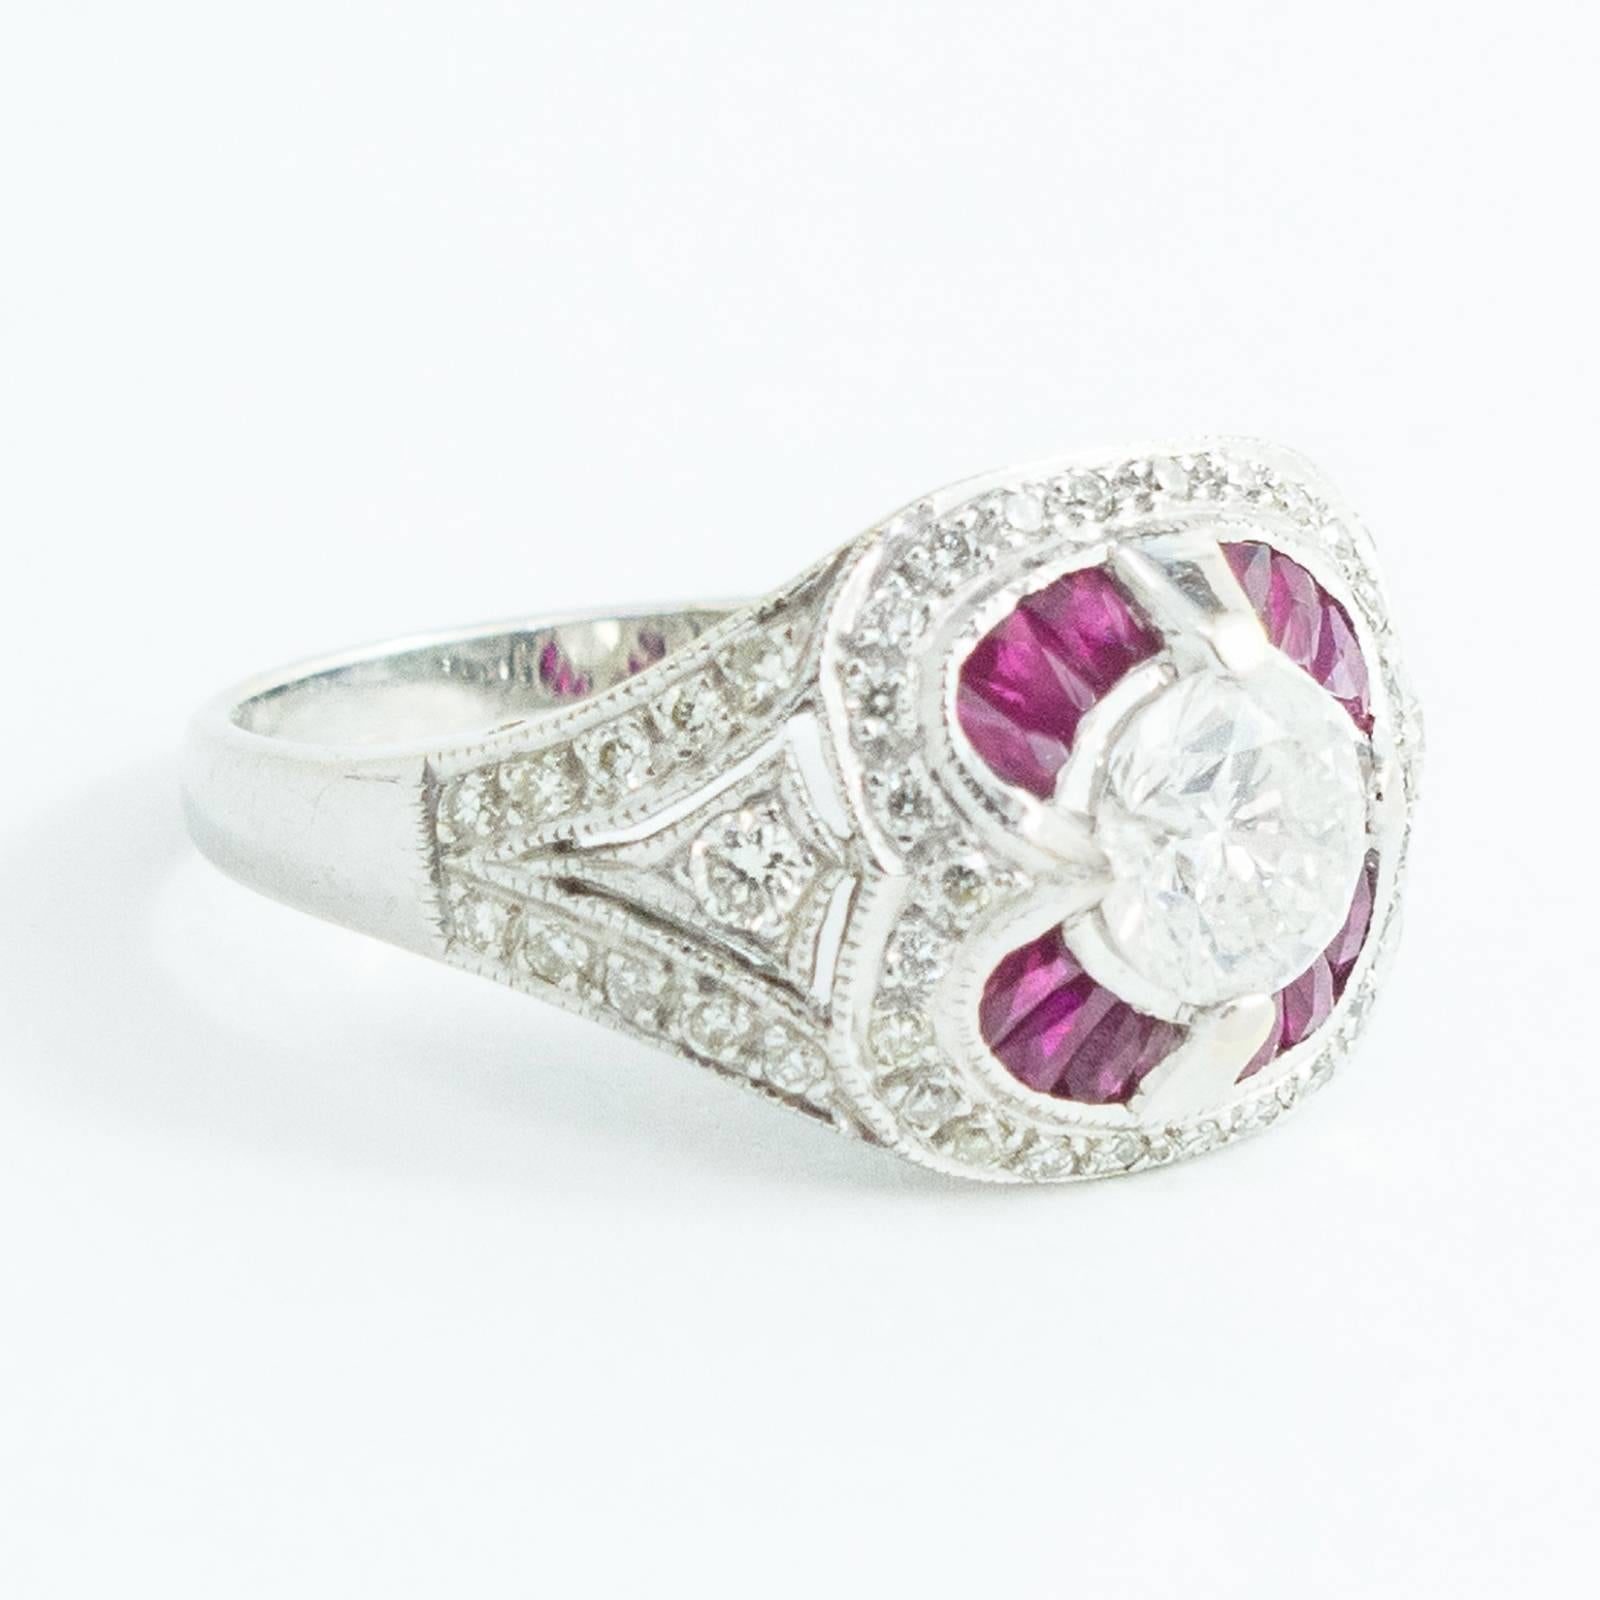 A stunning ring is center set with a .72 carat round, brilliant cut Diamond surrounded by 12 calibre cut tapered baguette natural Red Rubies (Corundums) totaling .55 carat and further embellished with 48 round, brilliant cut Diamonds. This 18K white